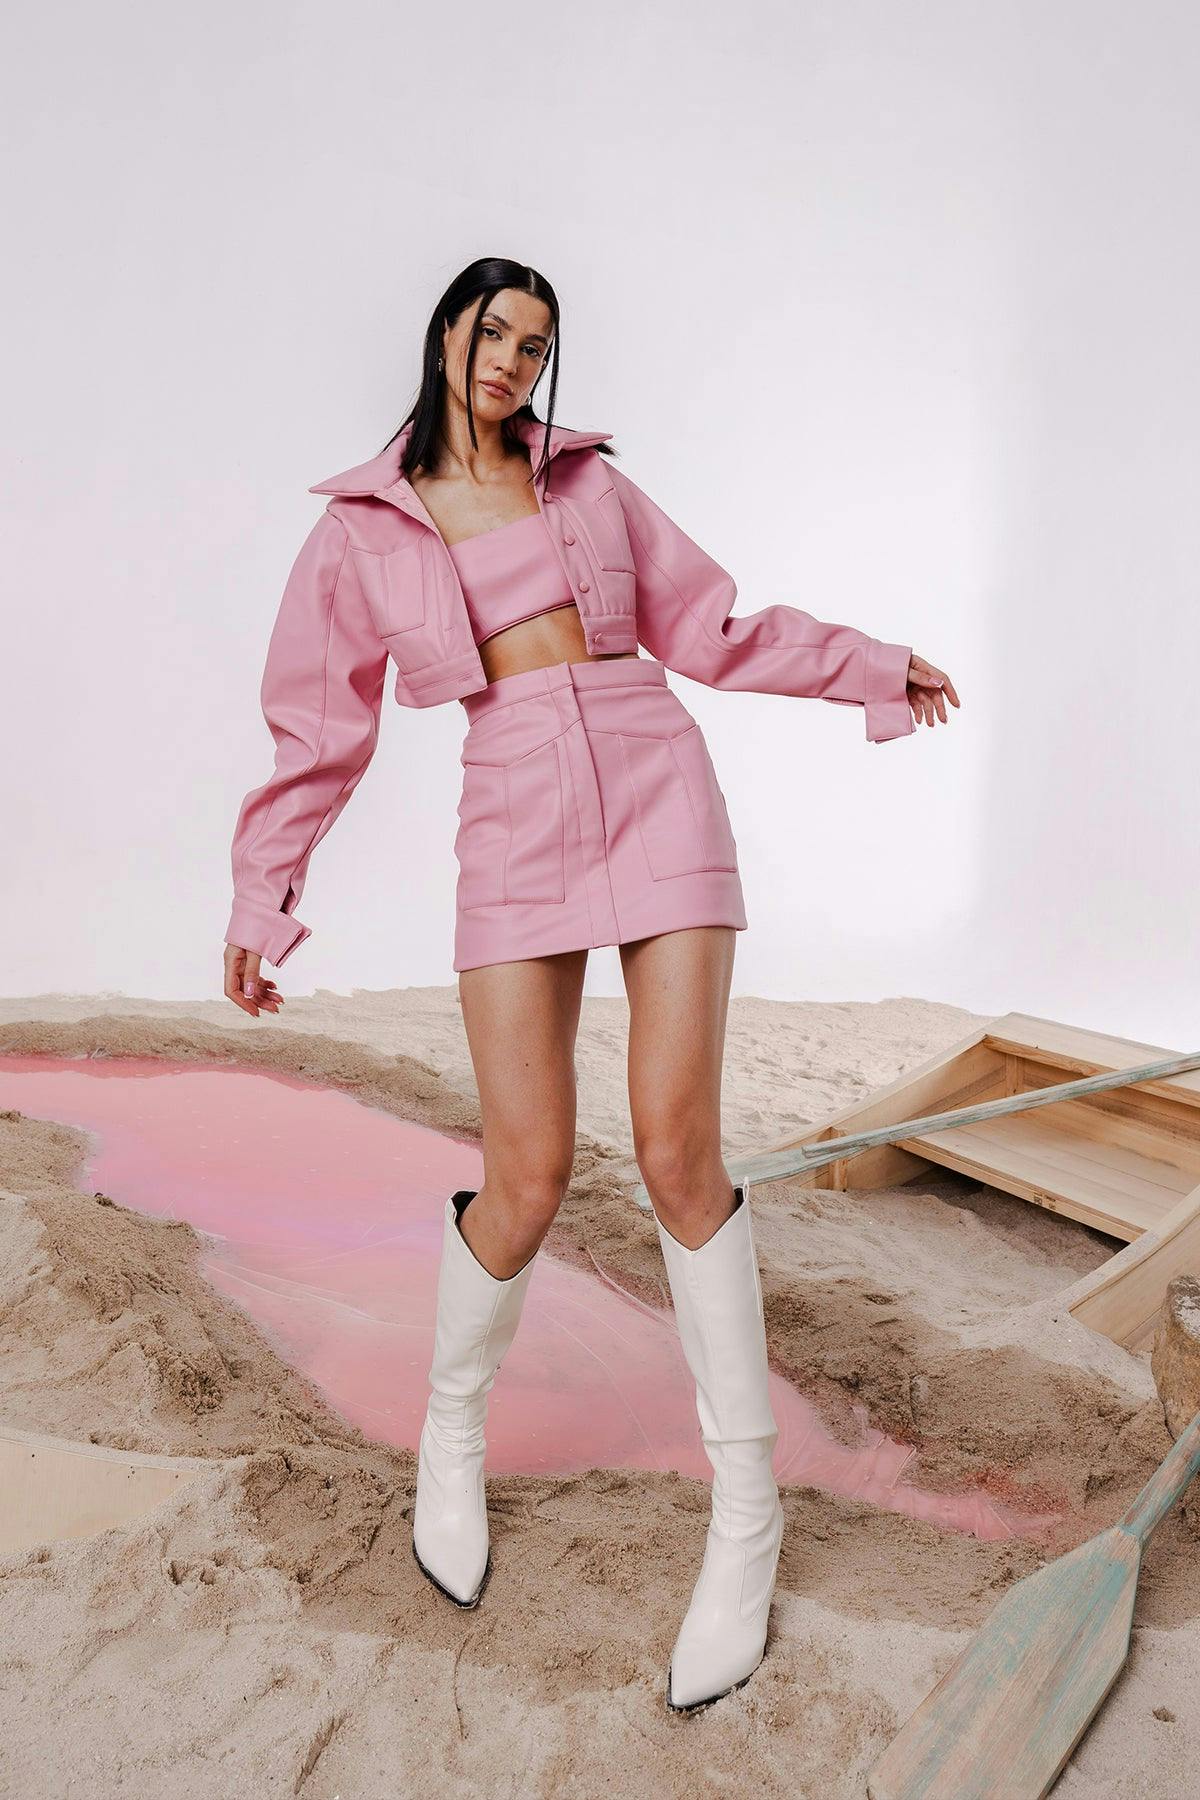 KOA BLUSH CROPPED JACKET WITH MATCHING BANDEAU & MINI SKIRT, a product by July Issue